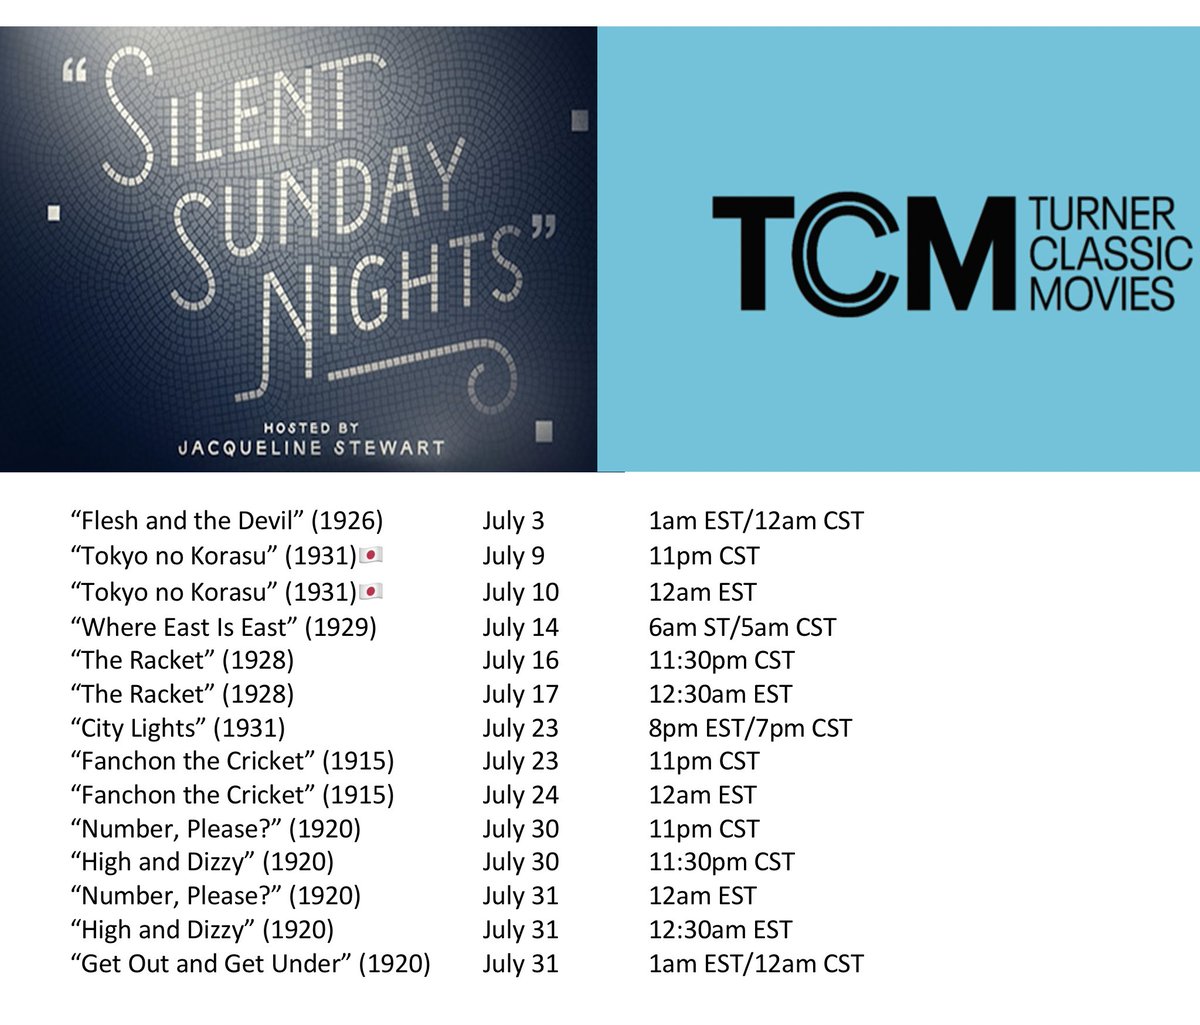 And here’s all of the #SilentFilm on TCM in July (that I can tell from the schedule that I’ve seen but I’ll update this if I find out more)
#SilentSundayNight #MaryPickford #GretaGarbo #LonChaney #CharlieChaplin #HaroldLloyd #Ozu #SaveTCM